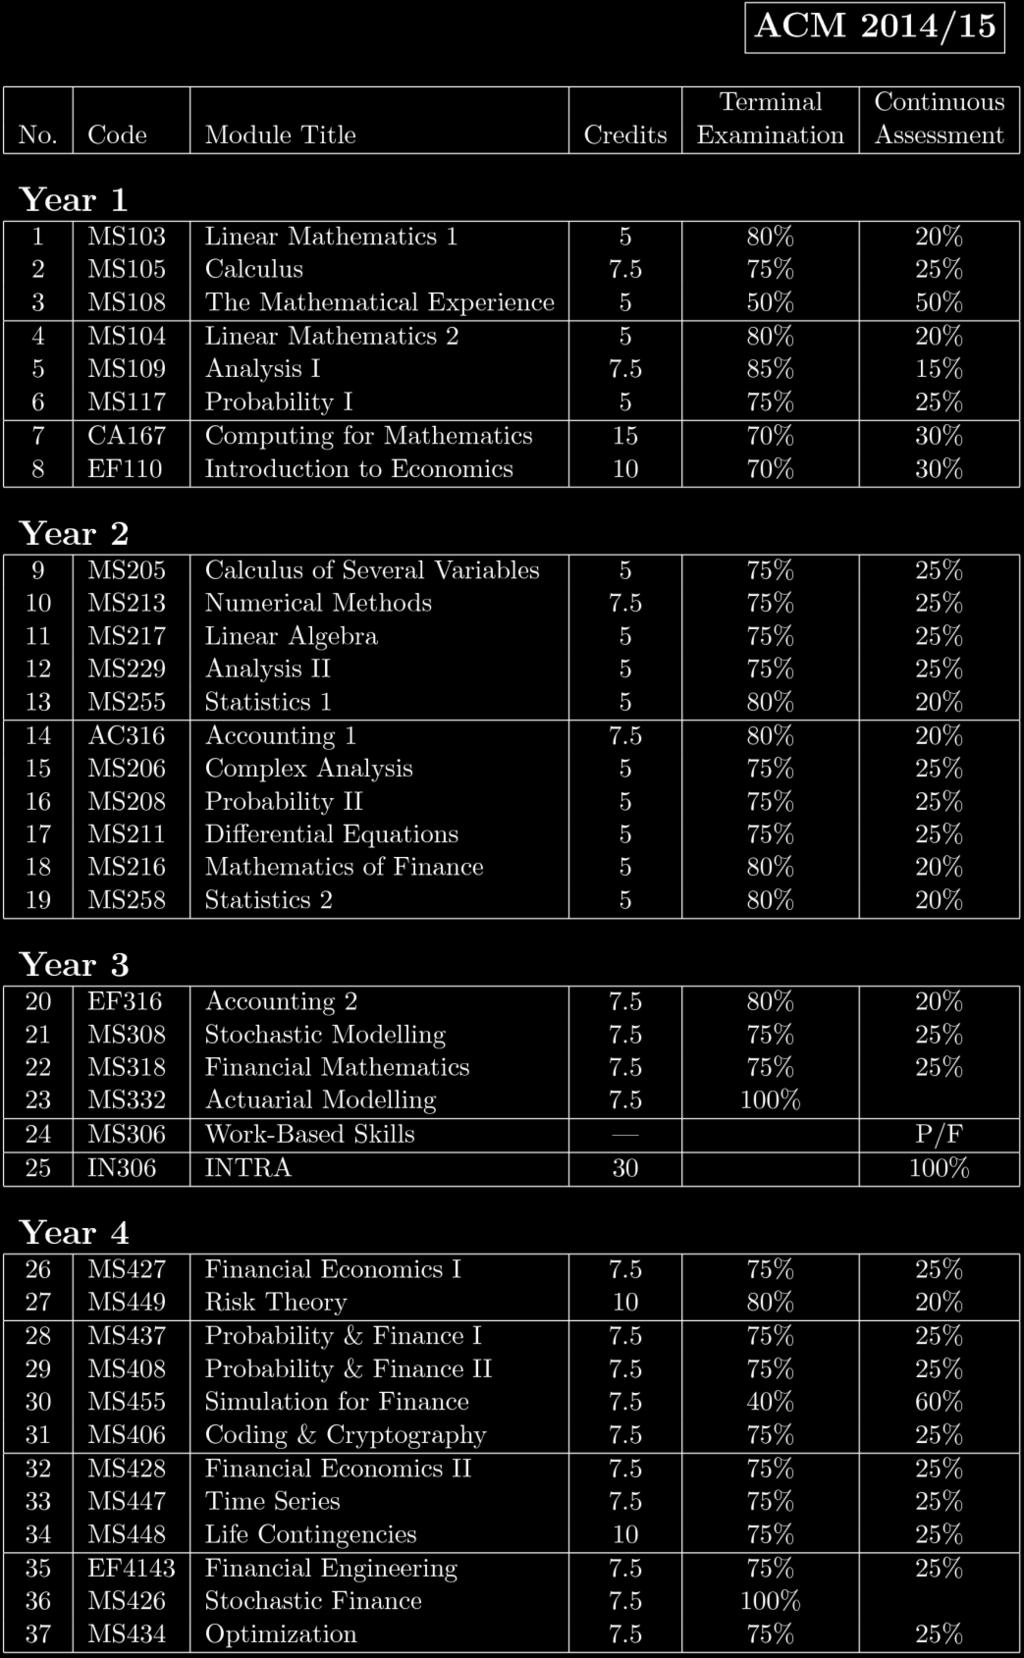 Table 8: 2014/15 Modules